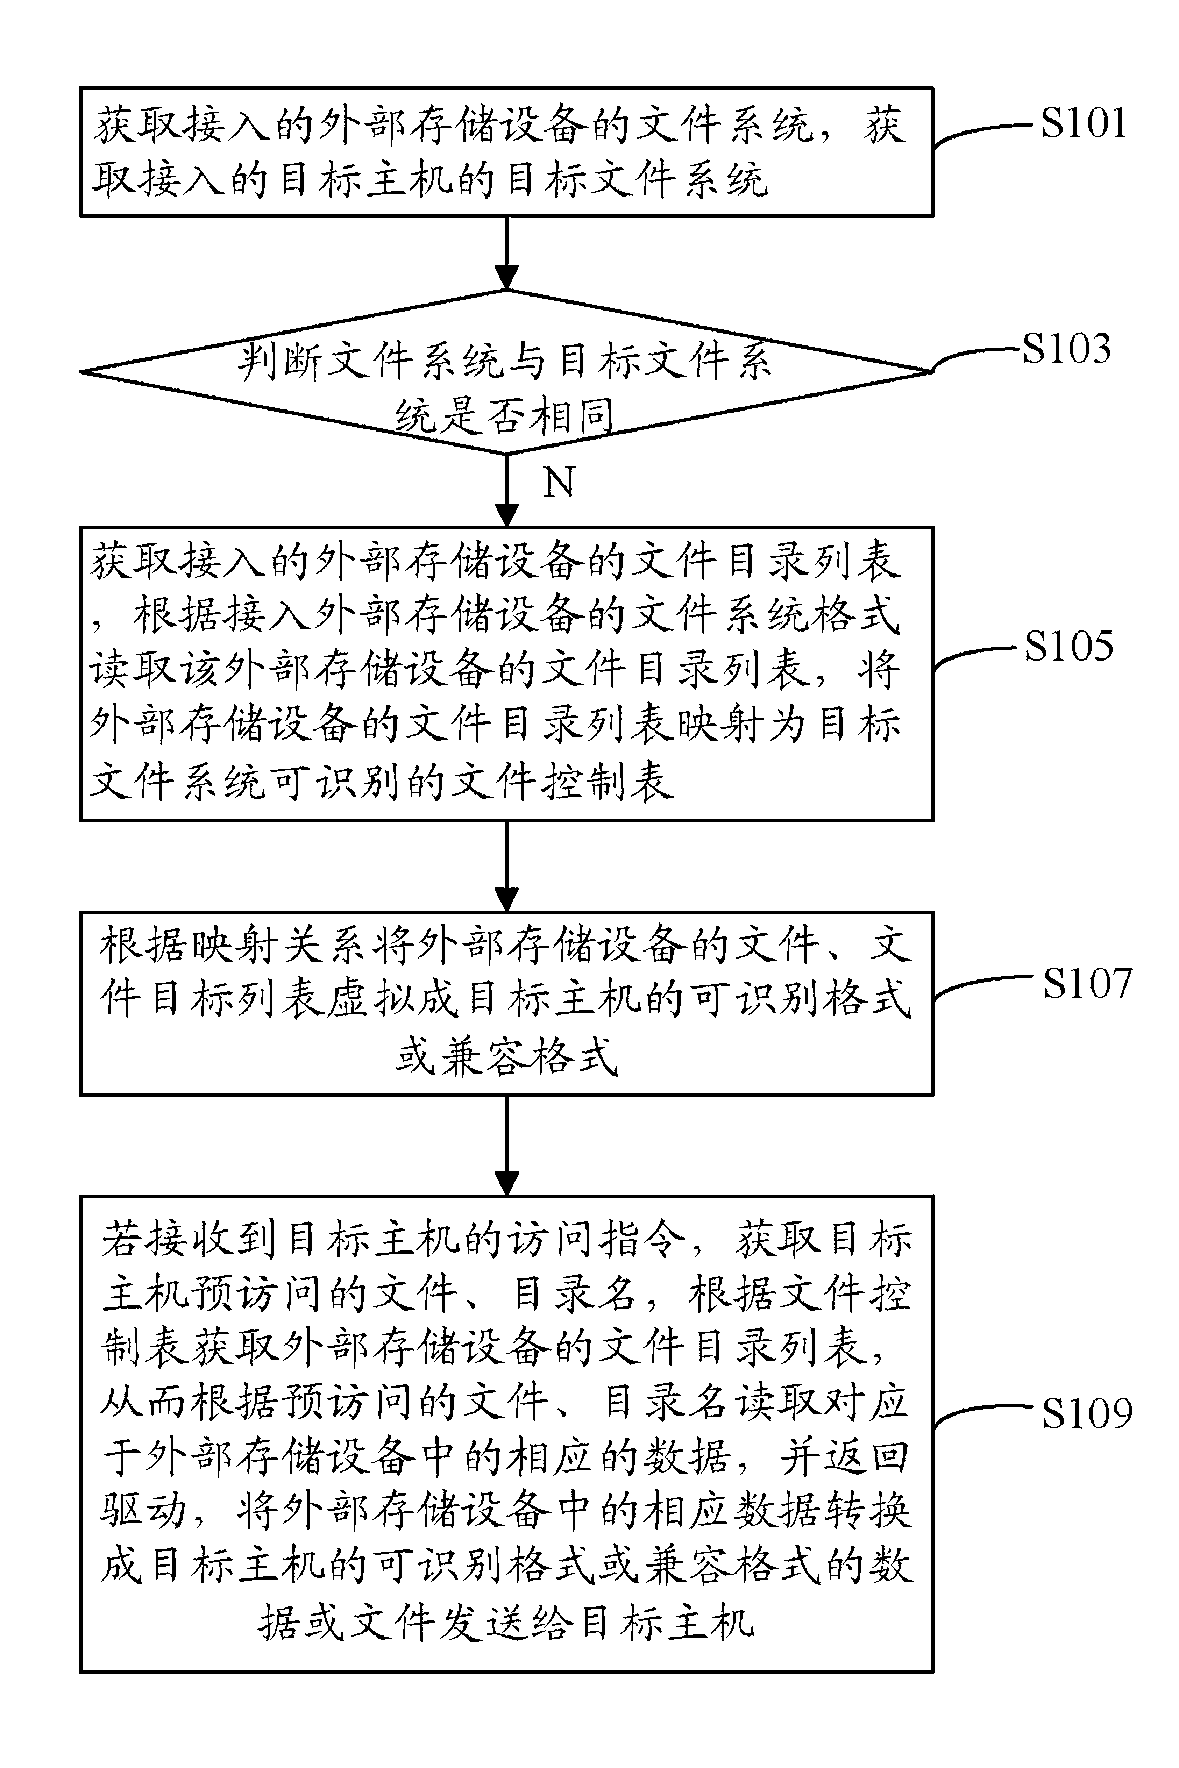 File system conversion access method and file system conversion access equipment